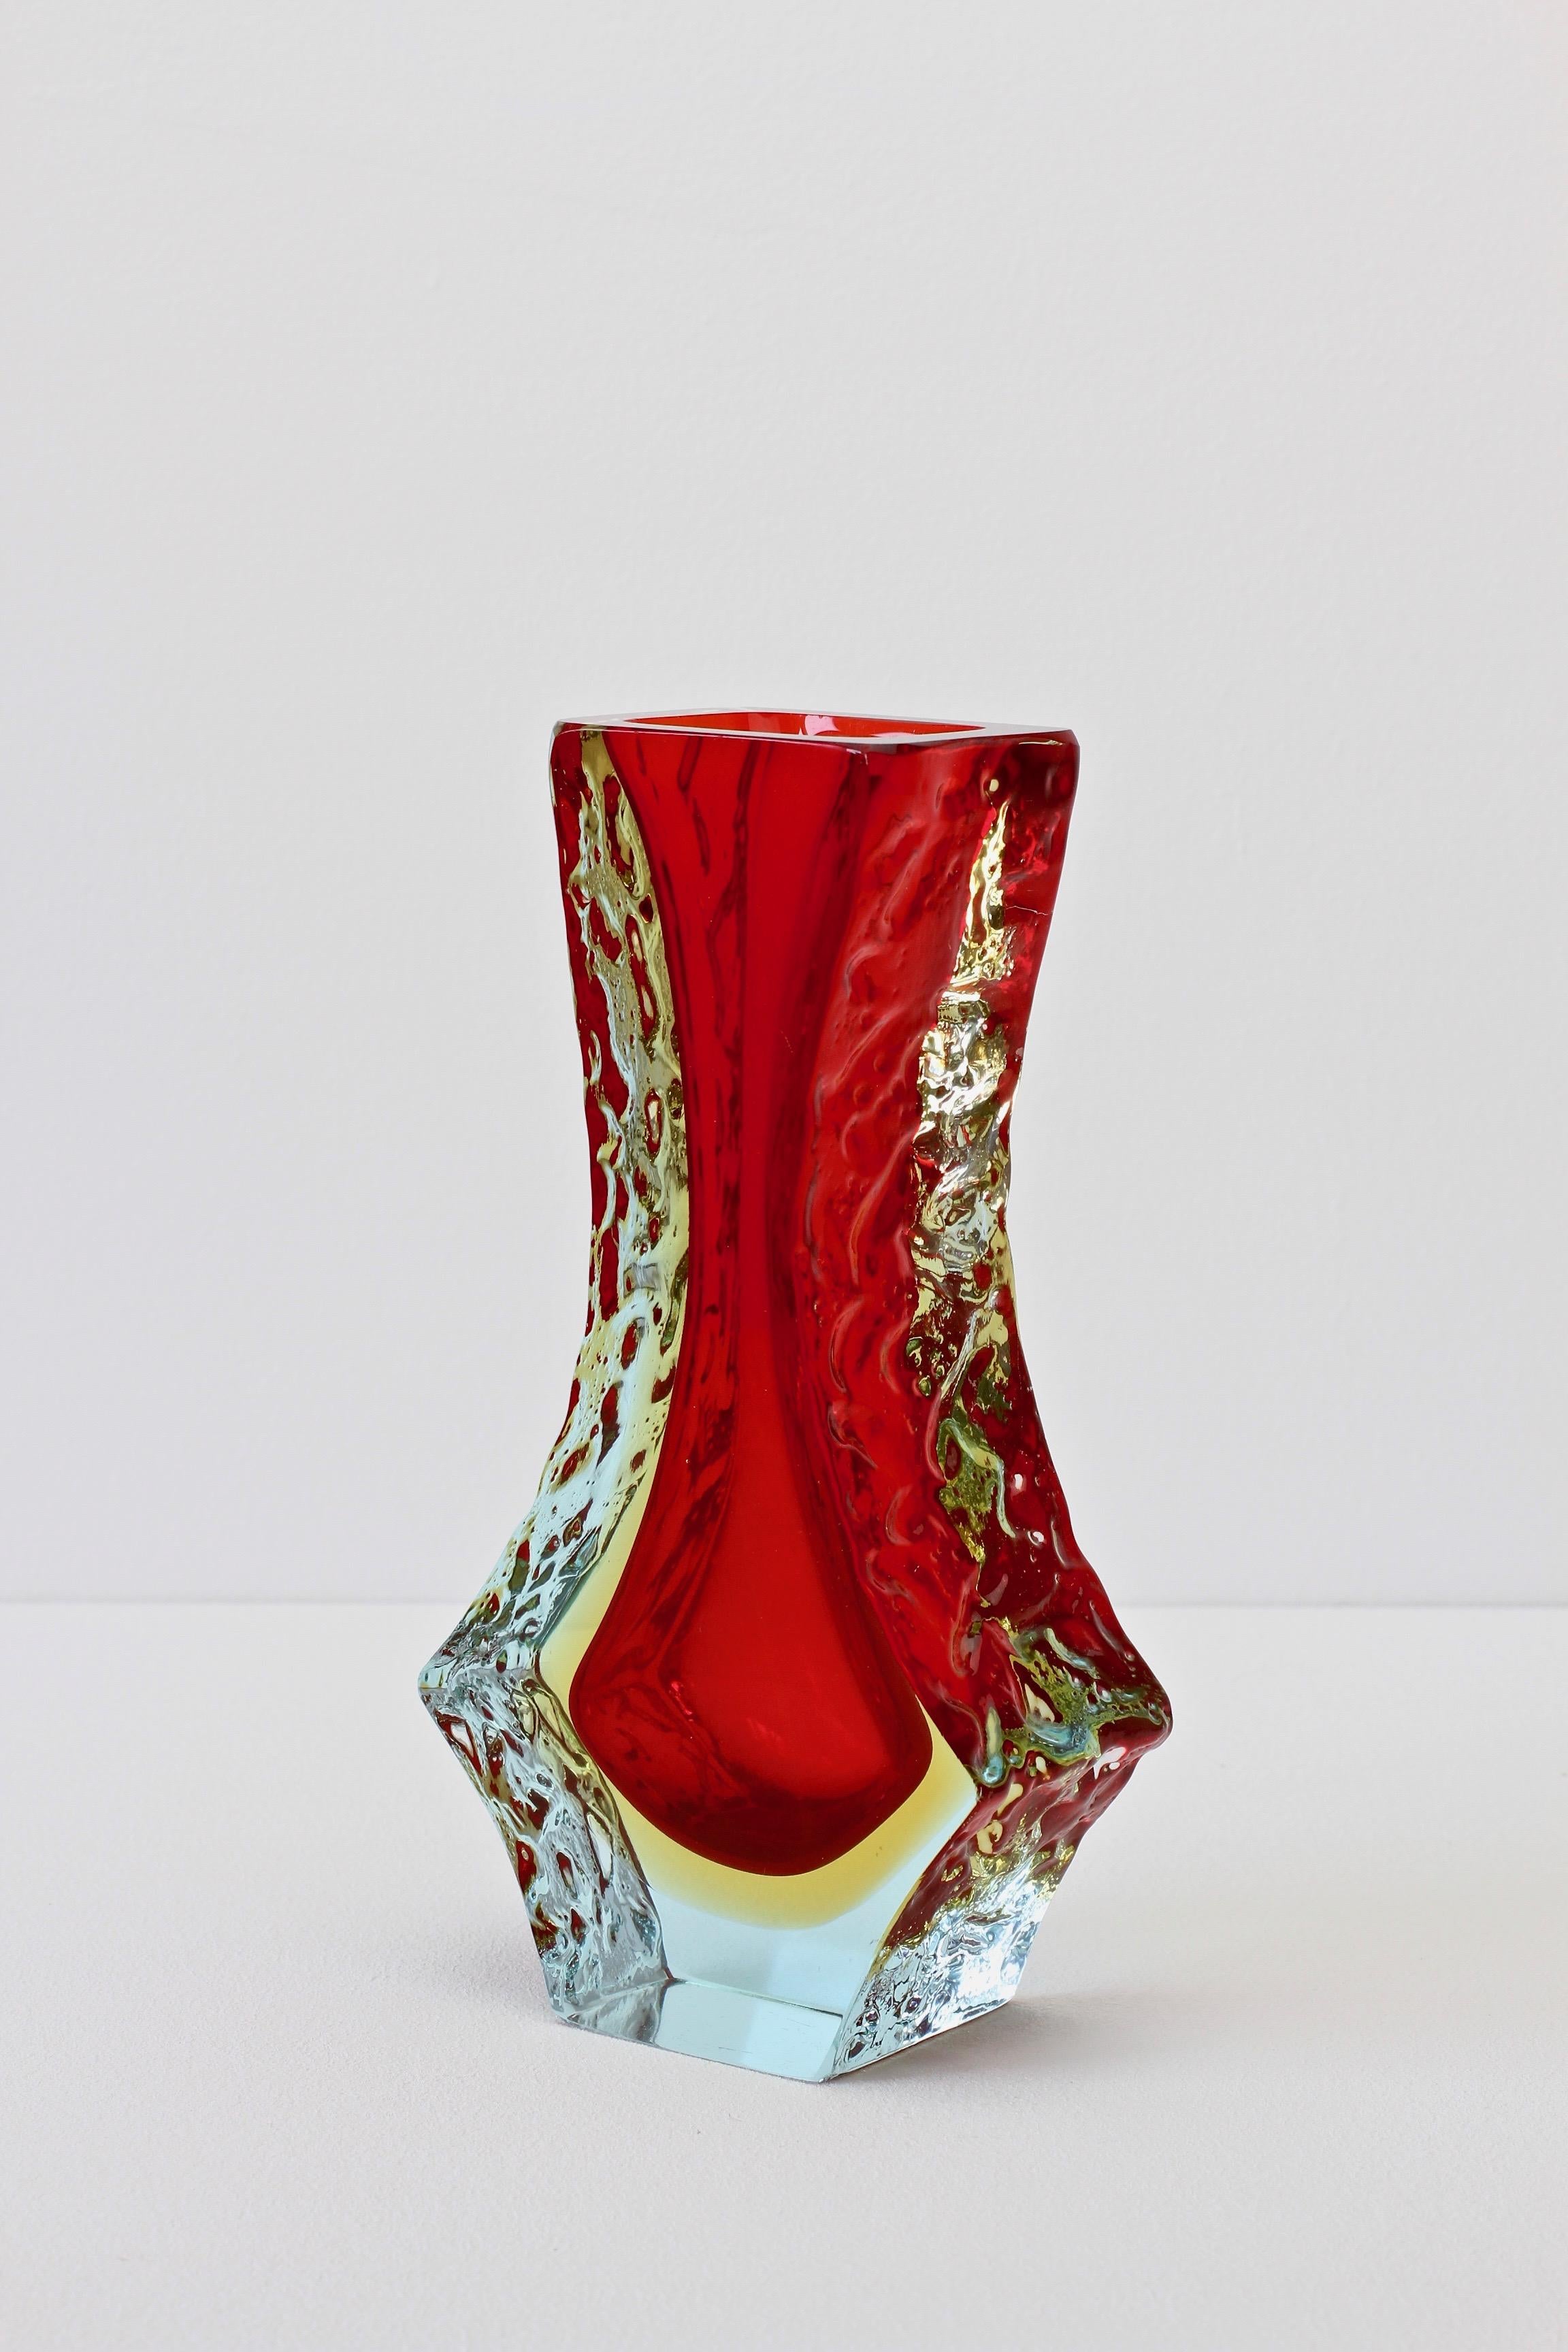 Blown Glass Italian Textured Faceted Murano 'Sommerso' Glass Vase Attributed to Mandruzzato